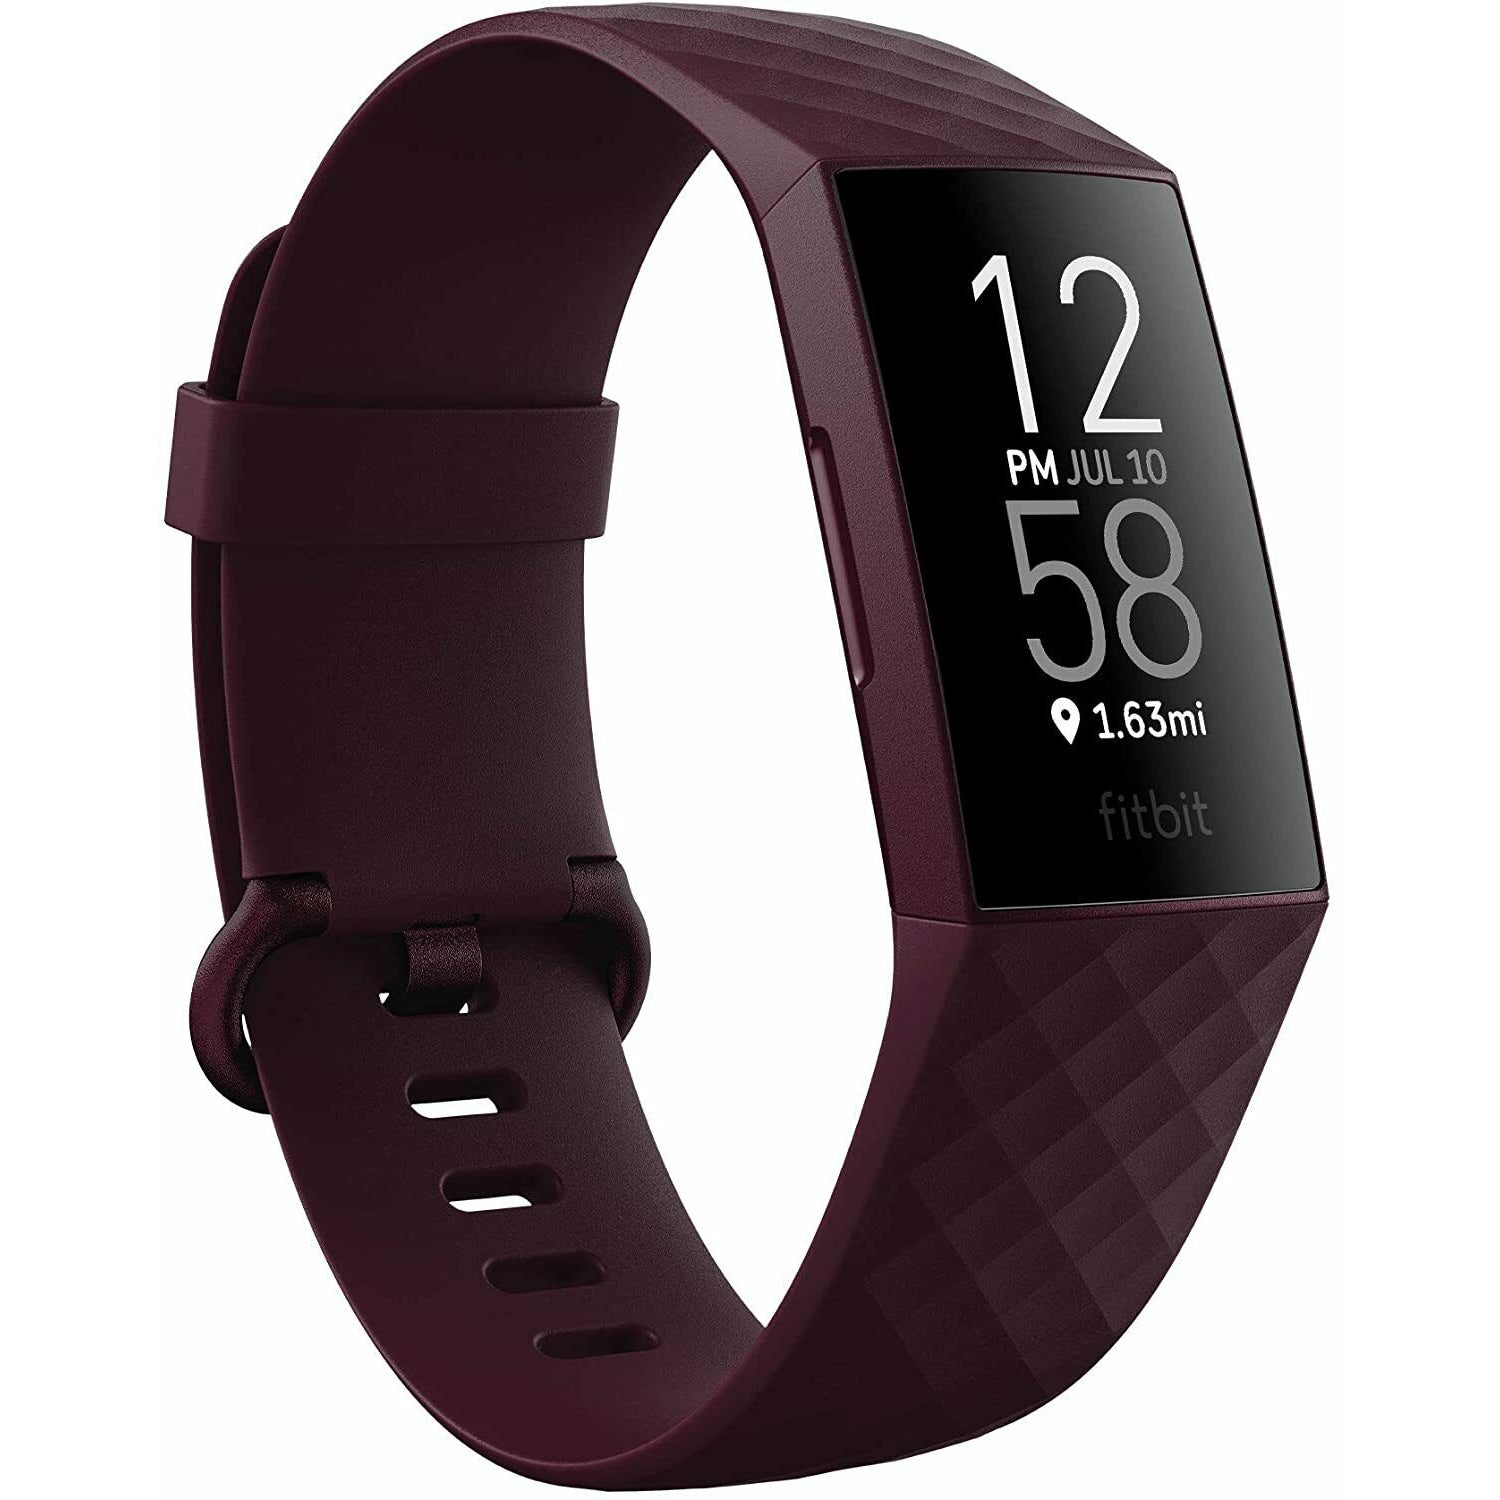 Fitbit Charge 4 Advanced Fitness Tracker with GPS - Rosewood - Refurbished Excellent